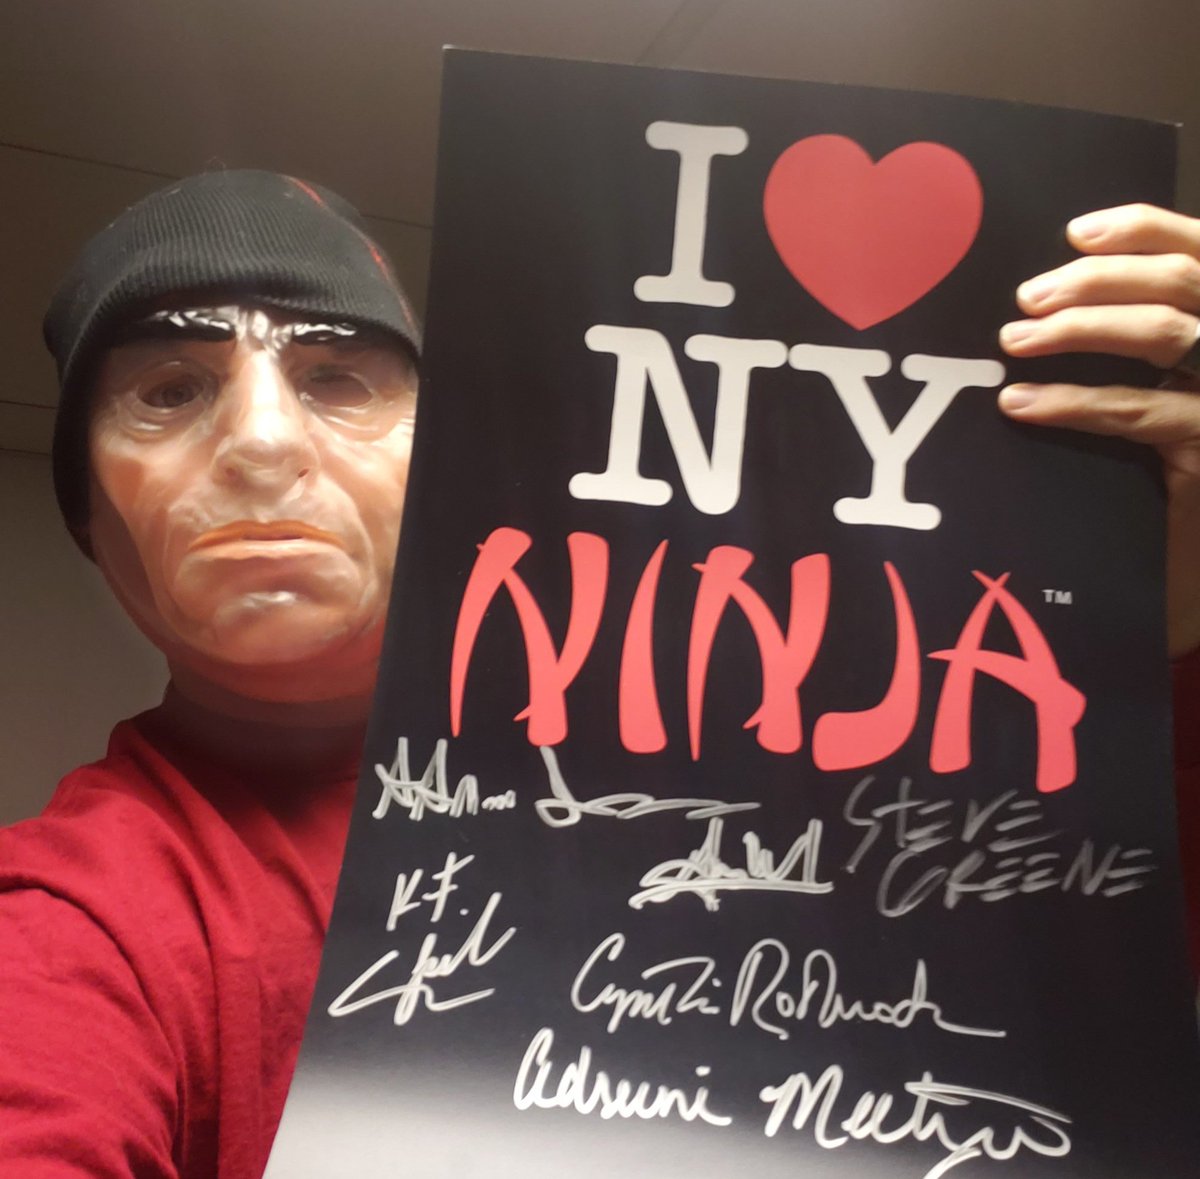 I was psyched to receive this amazing poster during the Vinegar Syndrome Black Friday sale that sold out. It's signed by Voyag3r,  Kurtis Spieler, Michael Gingold, Adrienne Meltzer and Cynthia Rothrock!
#vinegarsyndrome #newyorkninja #autograph #cultfim #cynthiarothrock